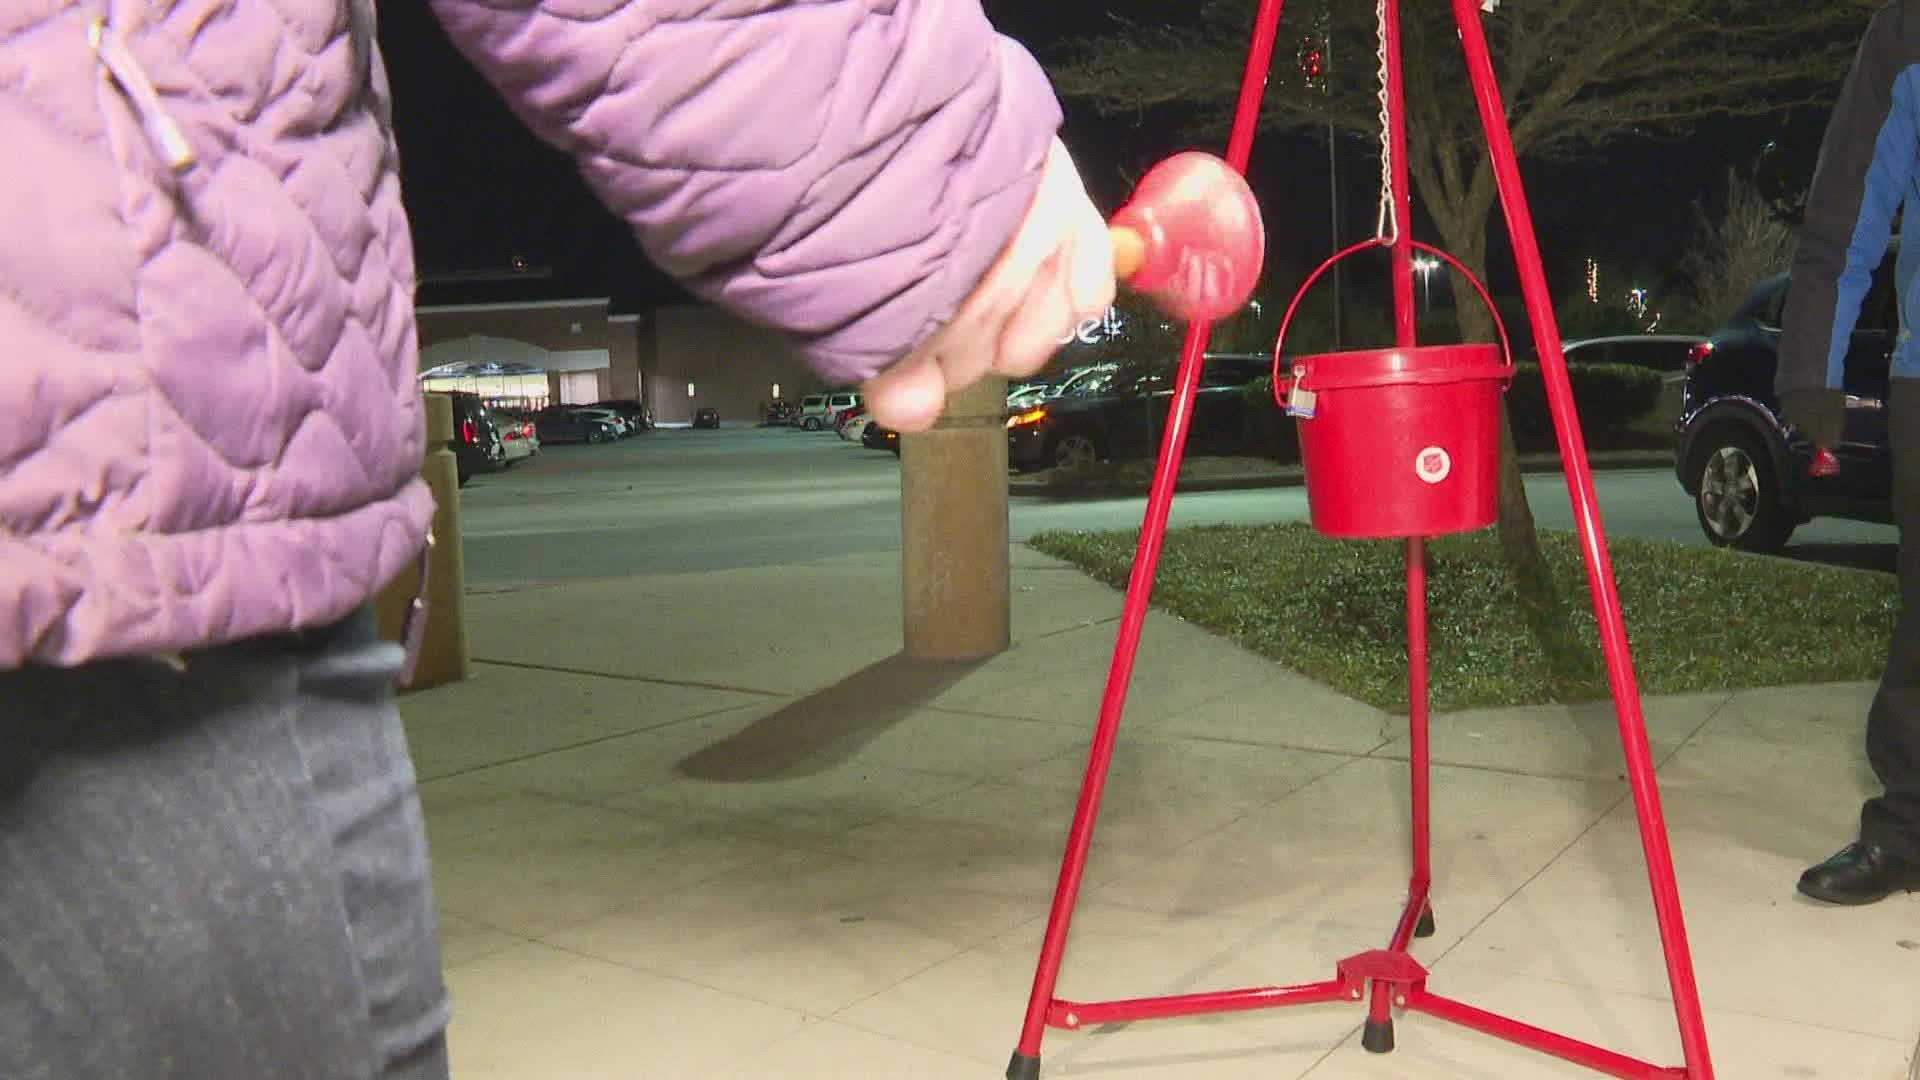 The Salvation Army struggled to find enough bell ringers due to the COVID-19 pandemic these last two years, but this year, organizers feel optimistic.